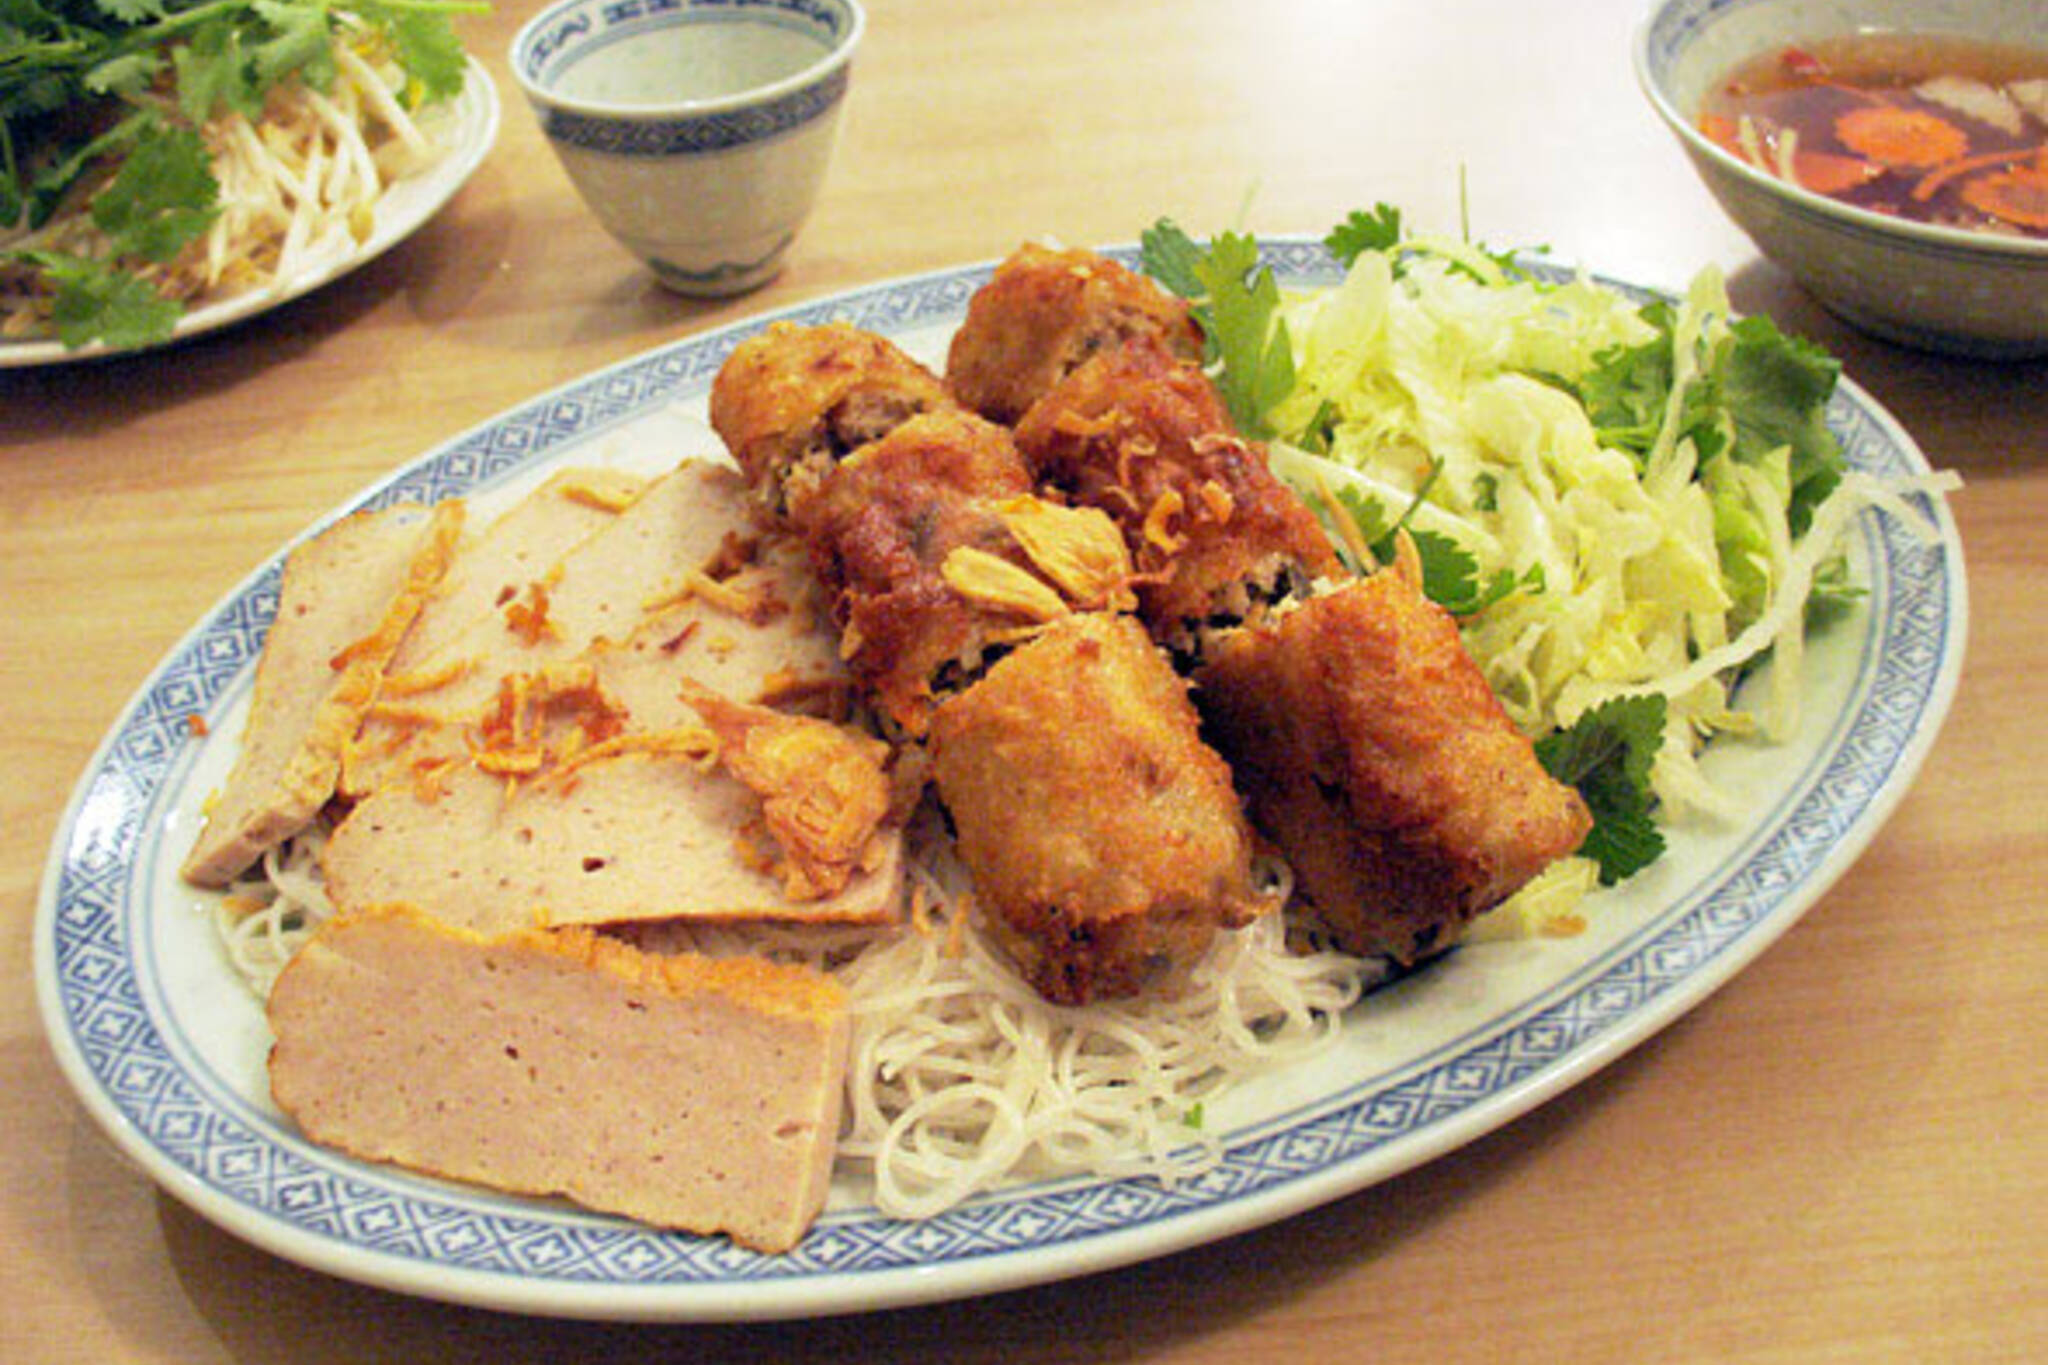 Spring Rolls, Deep Fried Cinnamon Ham on Vermicelli at Pho Rang Dong on St Clair West